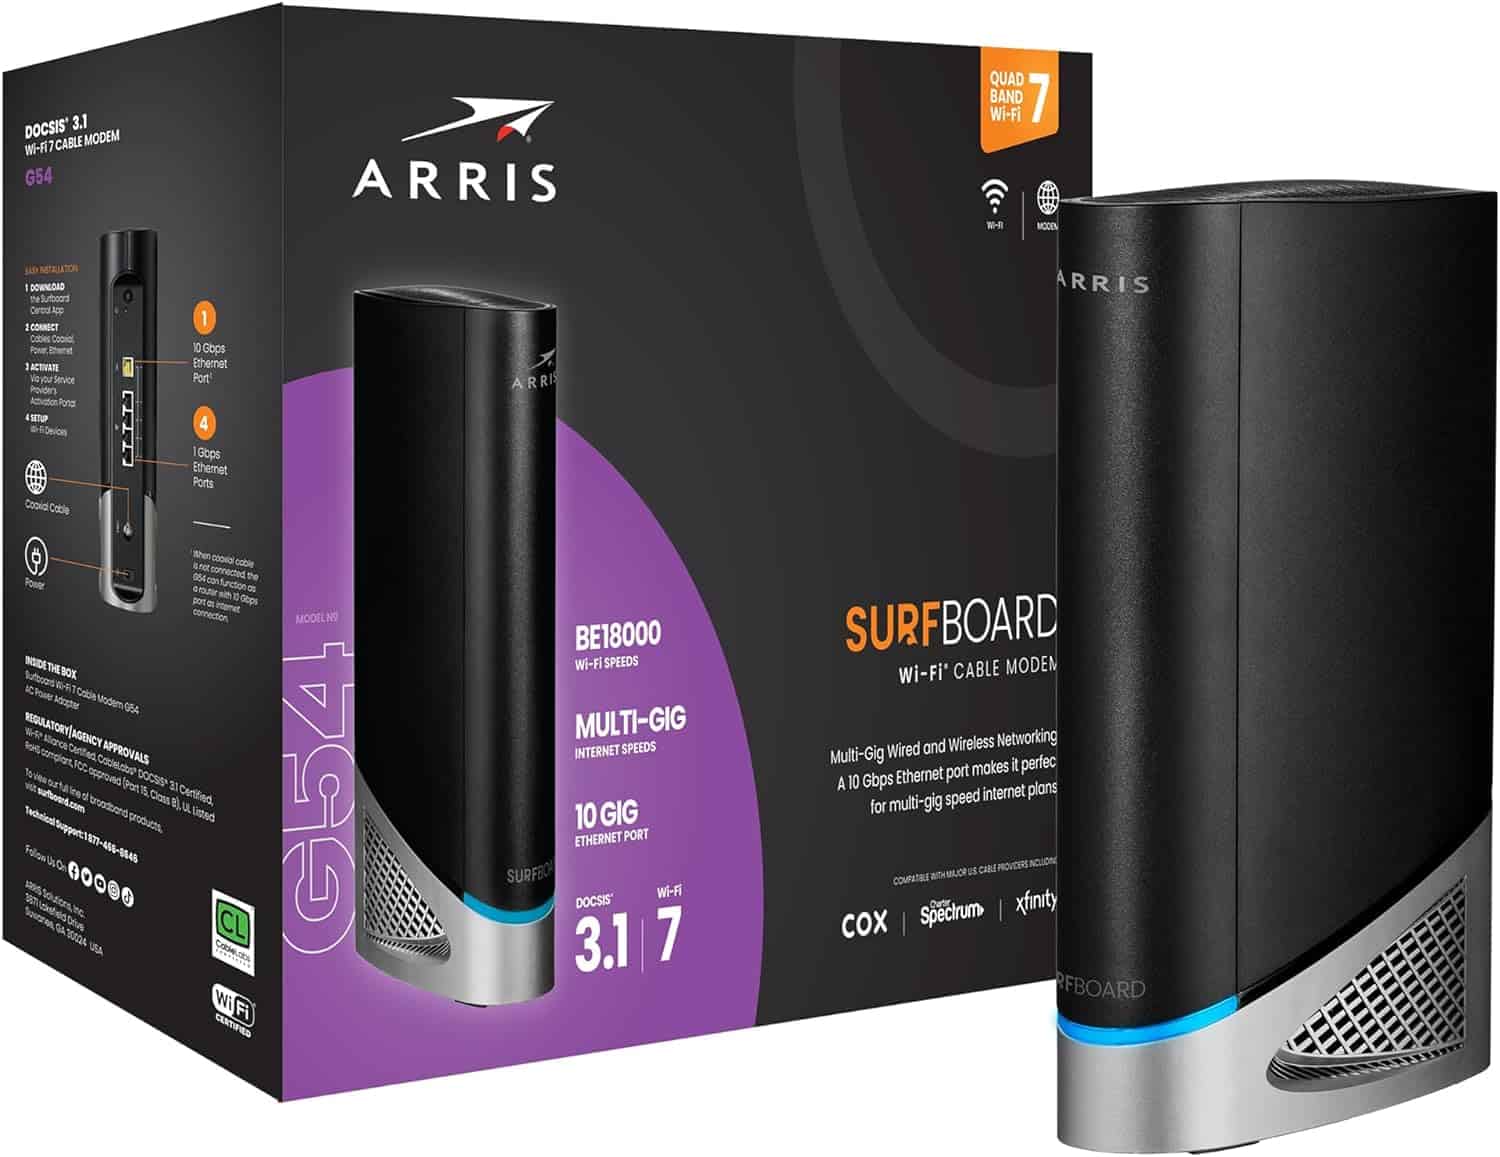 Arris Surfboard G54 multi-gig Wi-Fi router and cable modem with its packaging box showcasing key features and specifications.